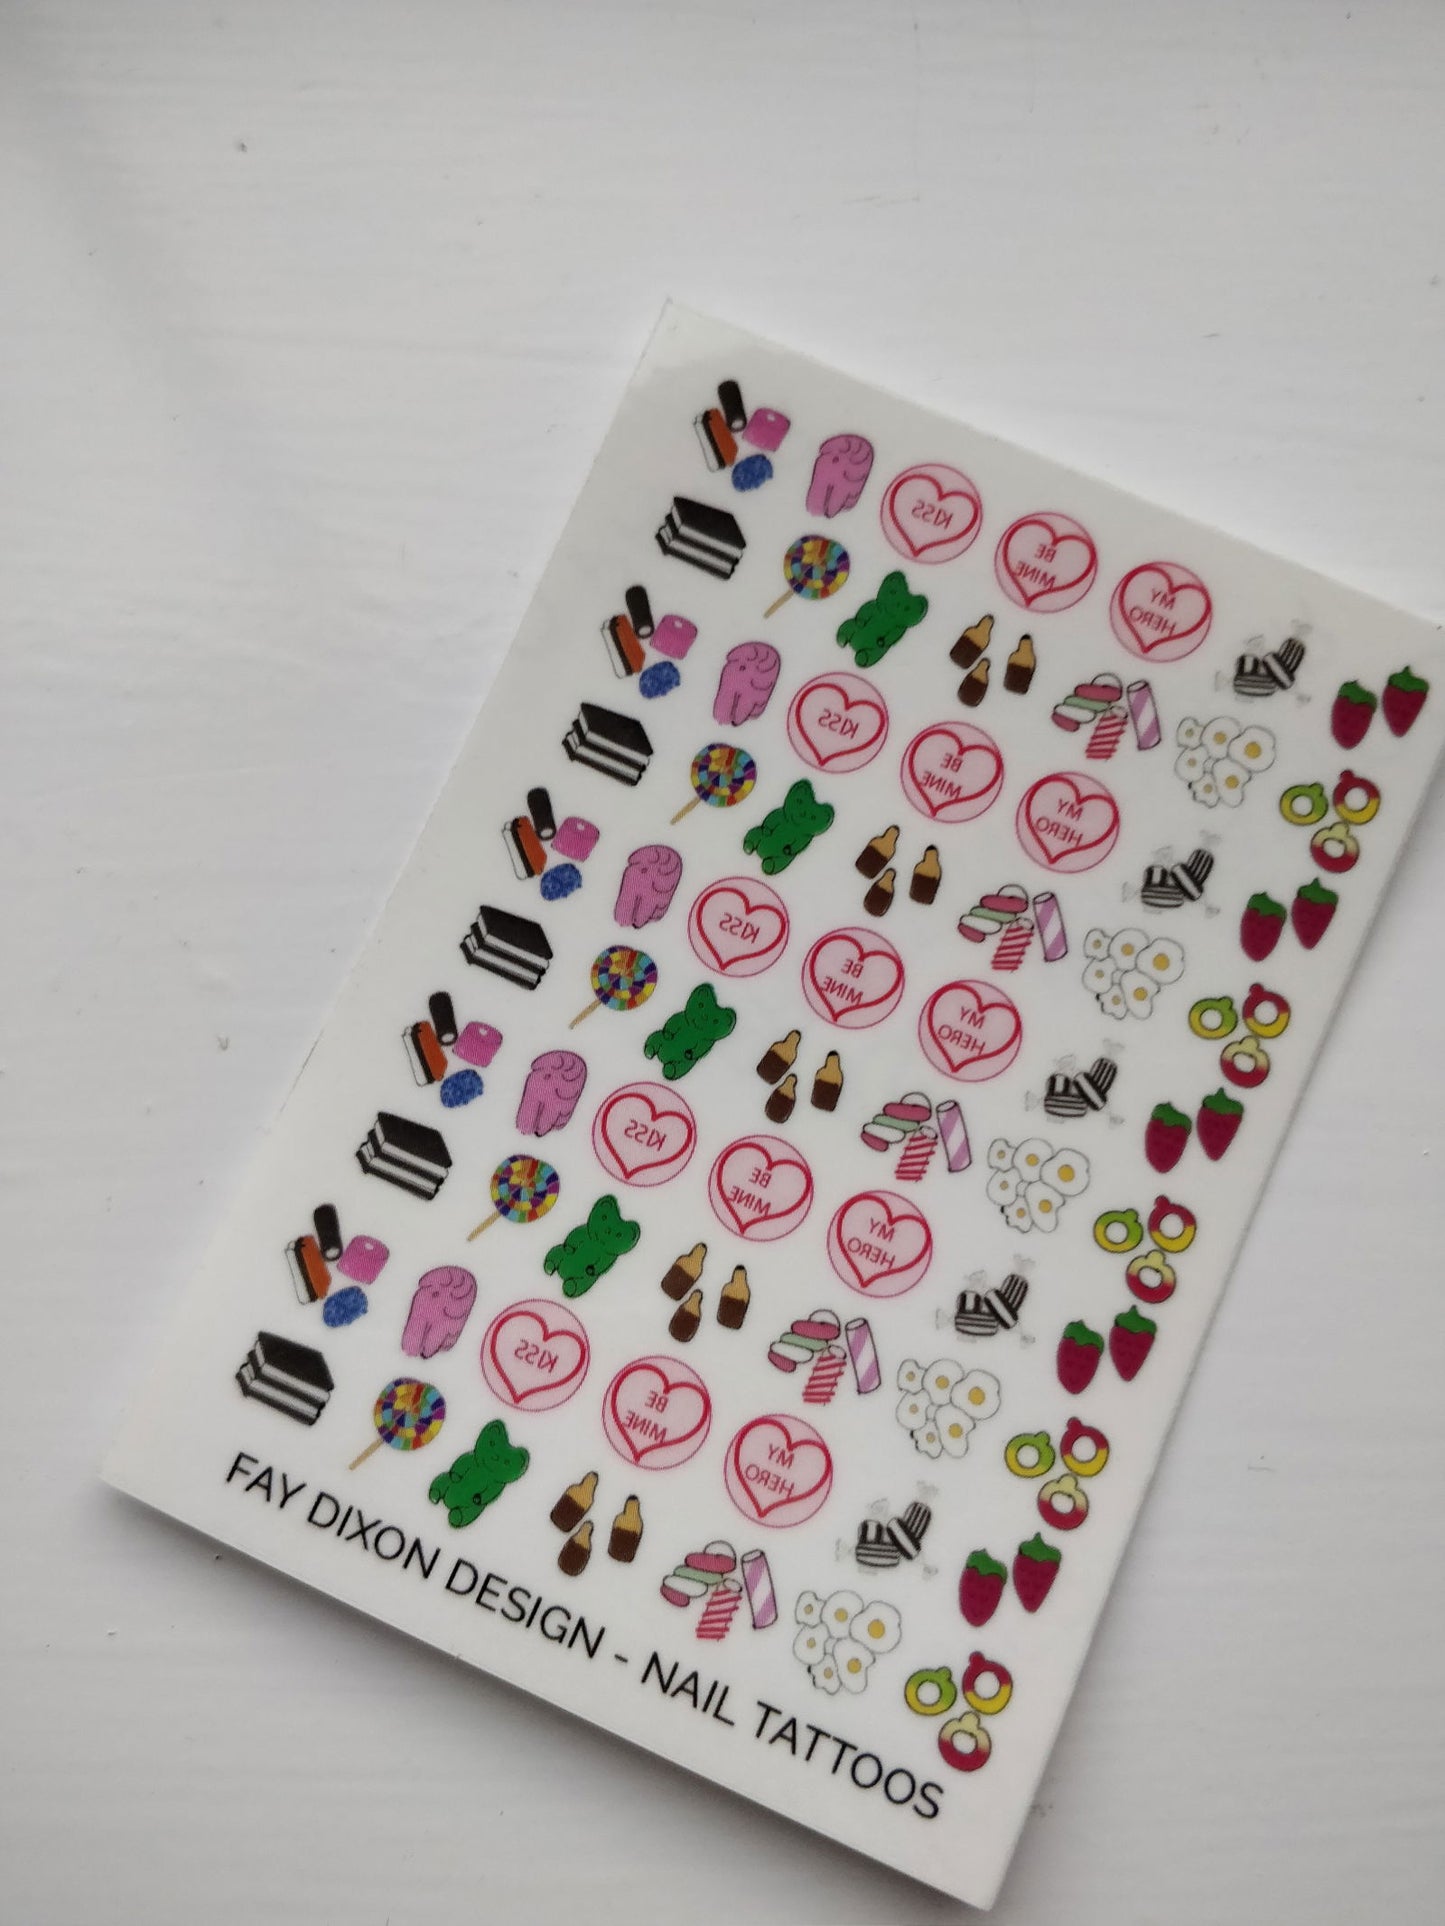 Sweets and Candy Nail Tattoos - Fay Dixon Design